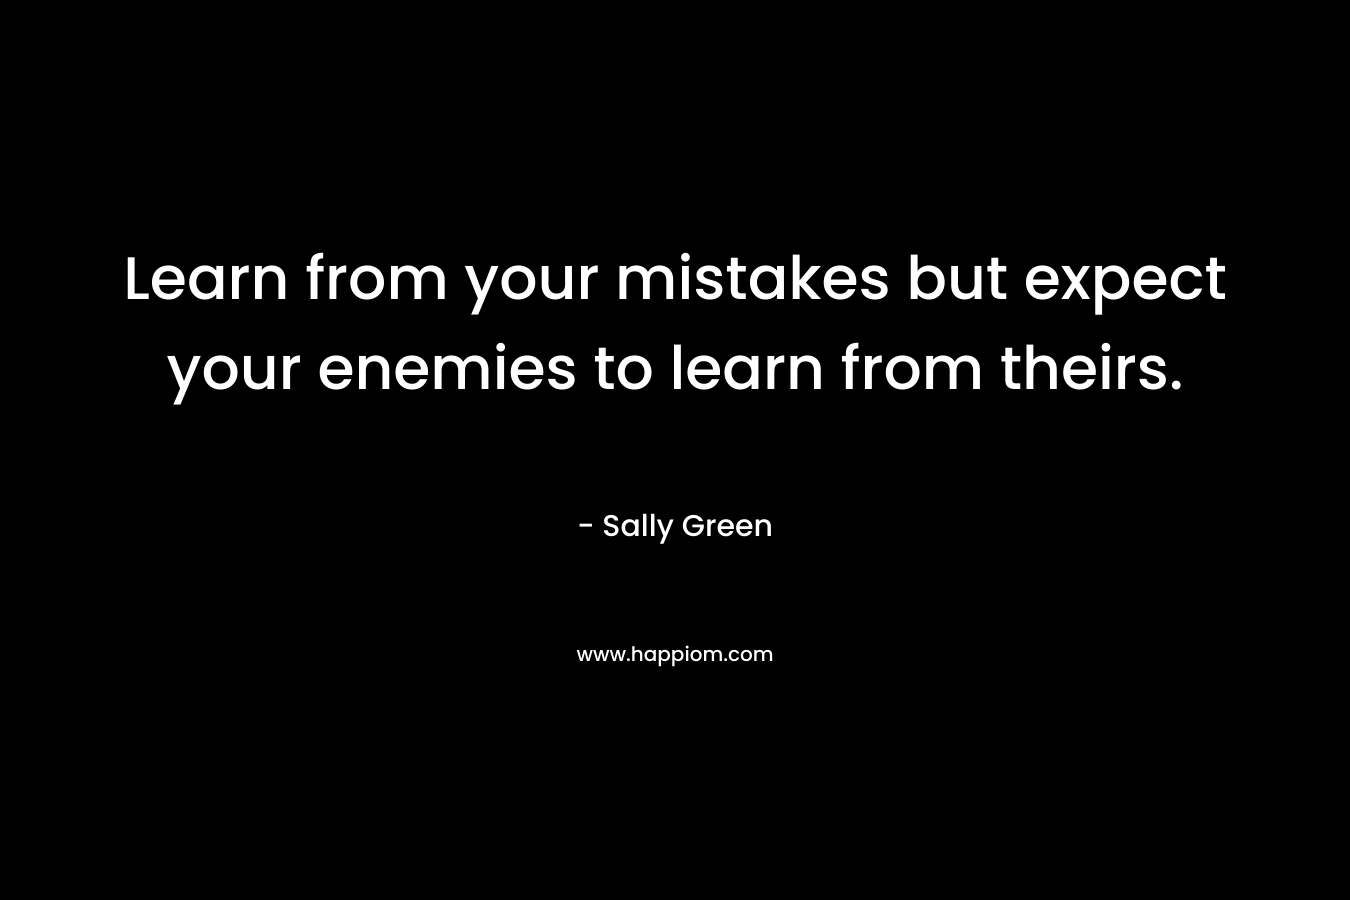 Learn from your mistakes but expect your enemies to learn from theirs.